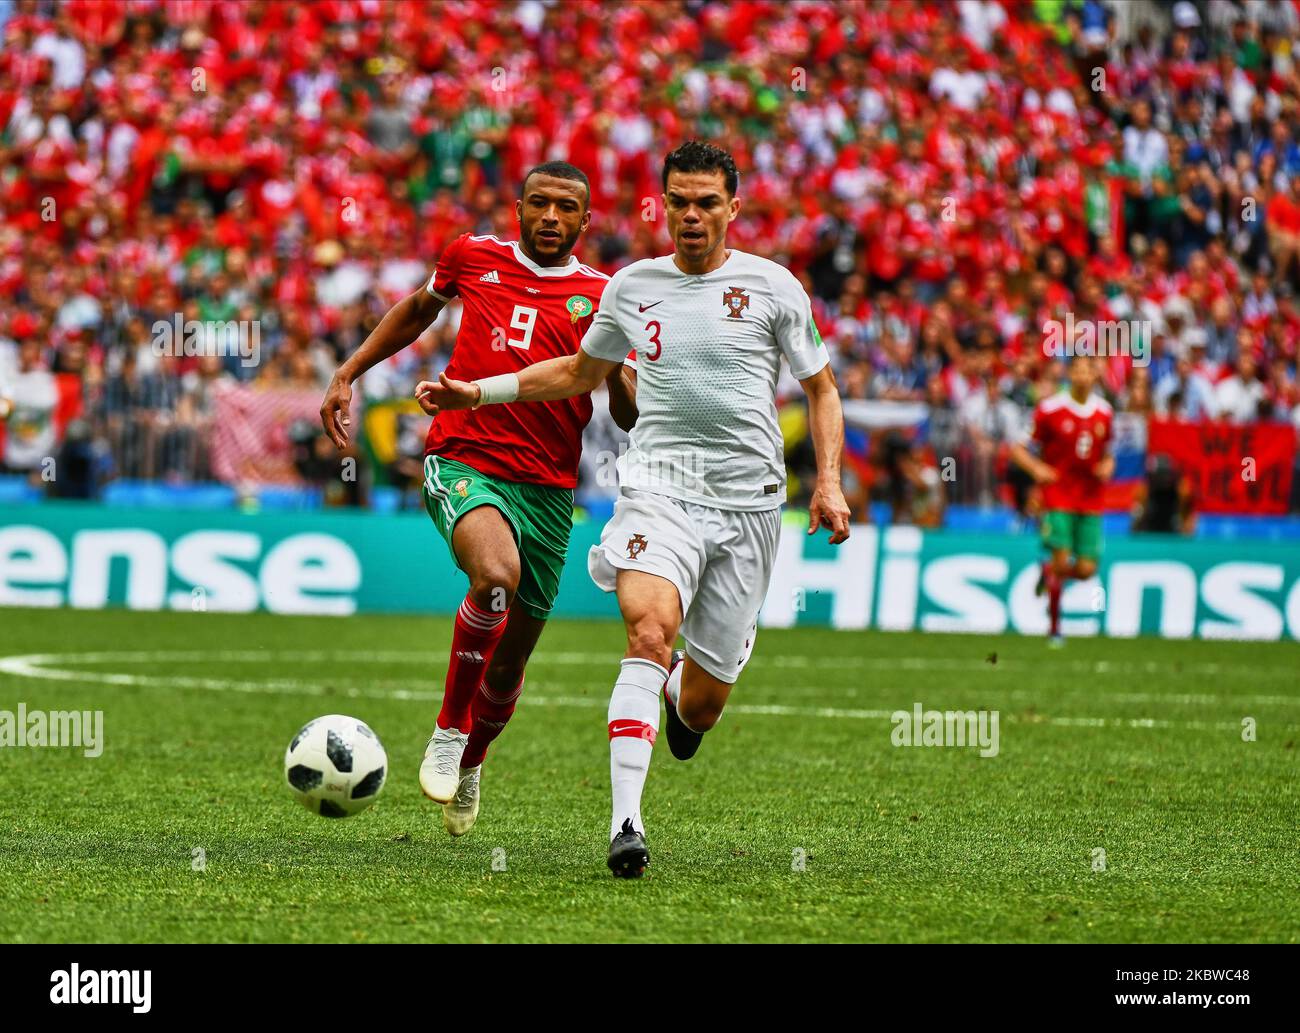 Pepe of Portugal and Ayoub El Kaabi of Morocco during the FIFA World Cup match Portugal versus Morocco at Luzhniki Stadium, Moscow, Russia on June 20, 2018. (Photo by Ulrik Pedersen/NurPhoto) Stock Photo